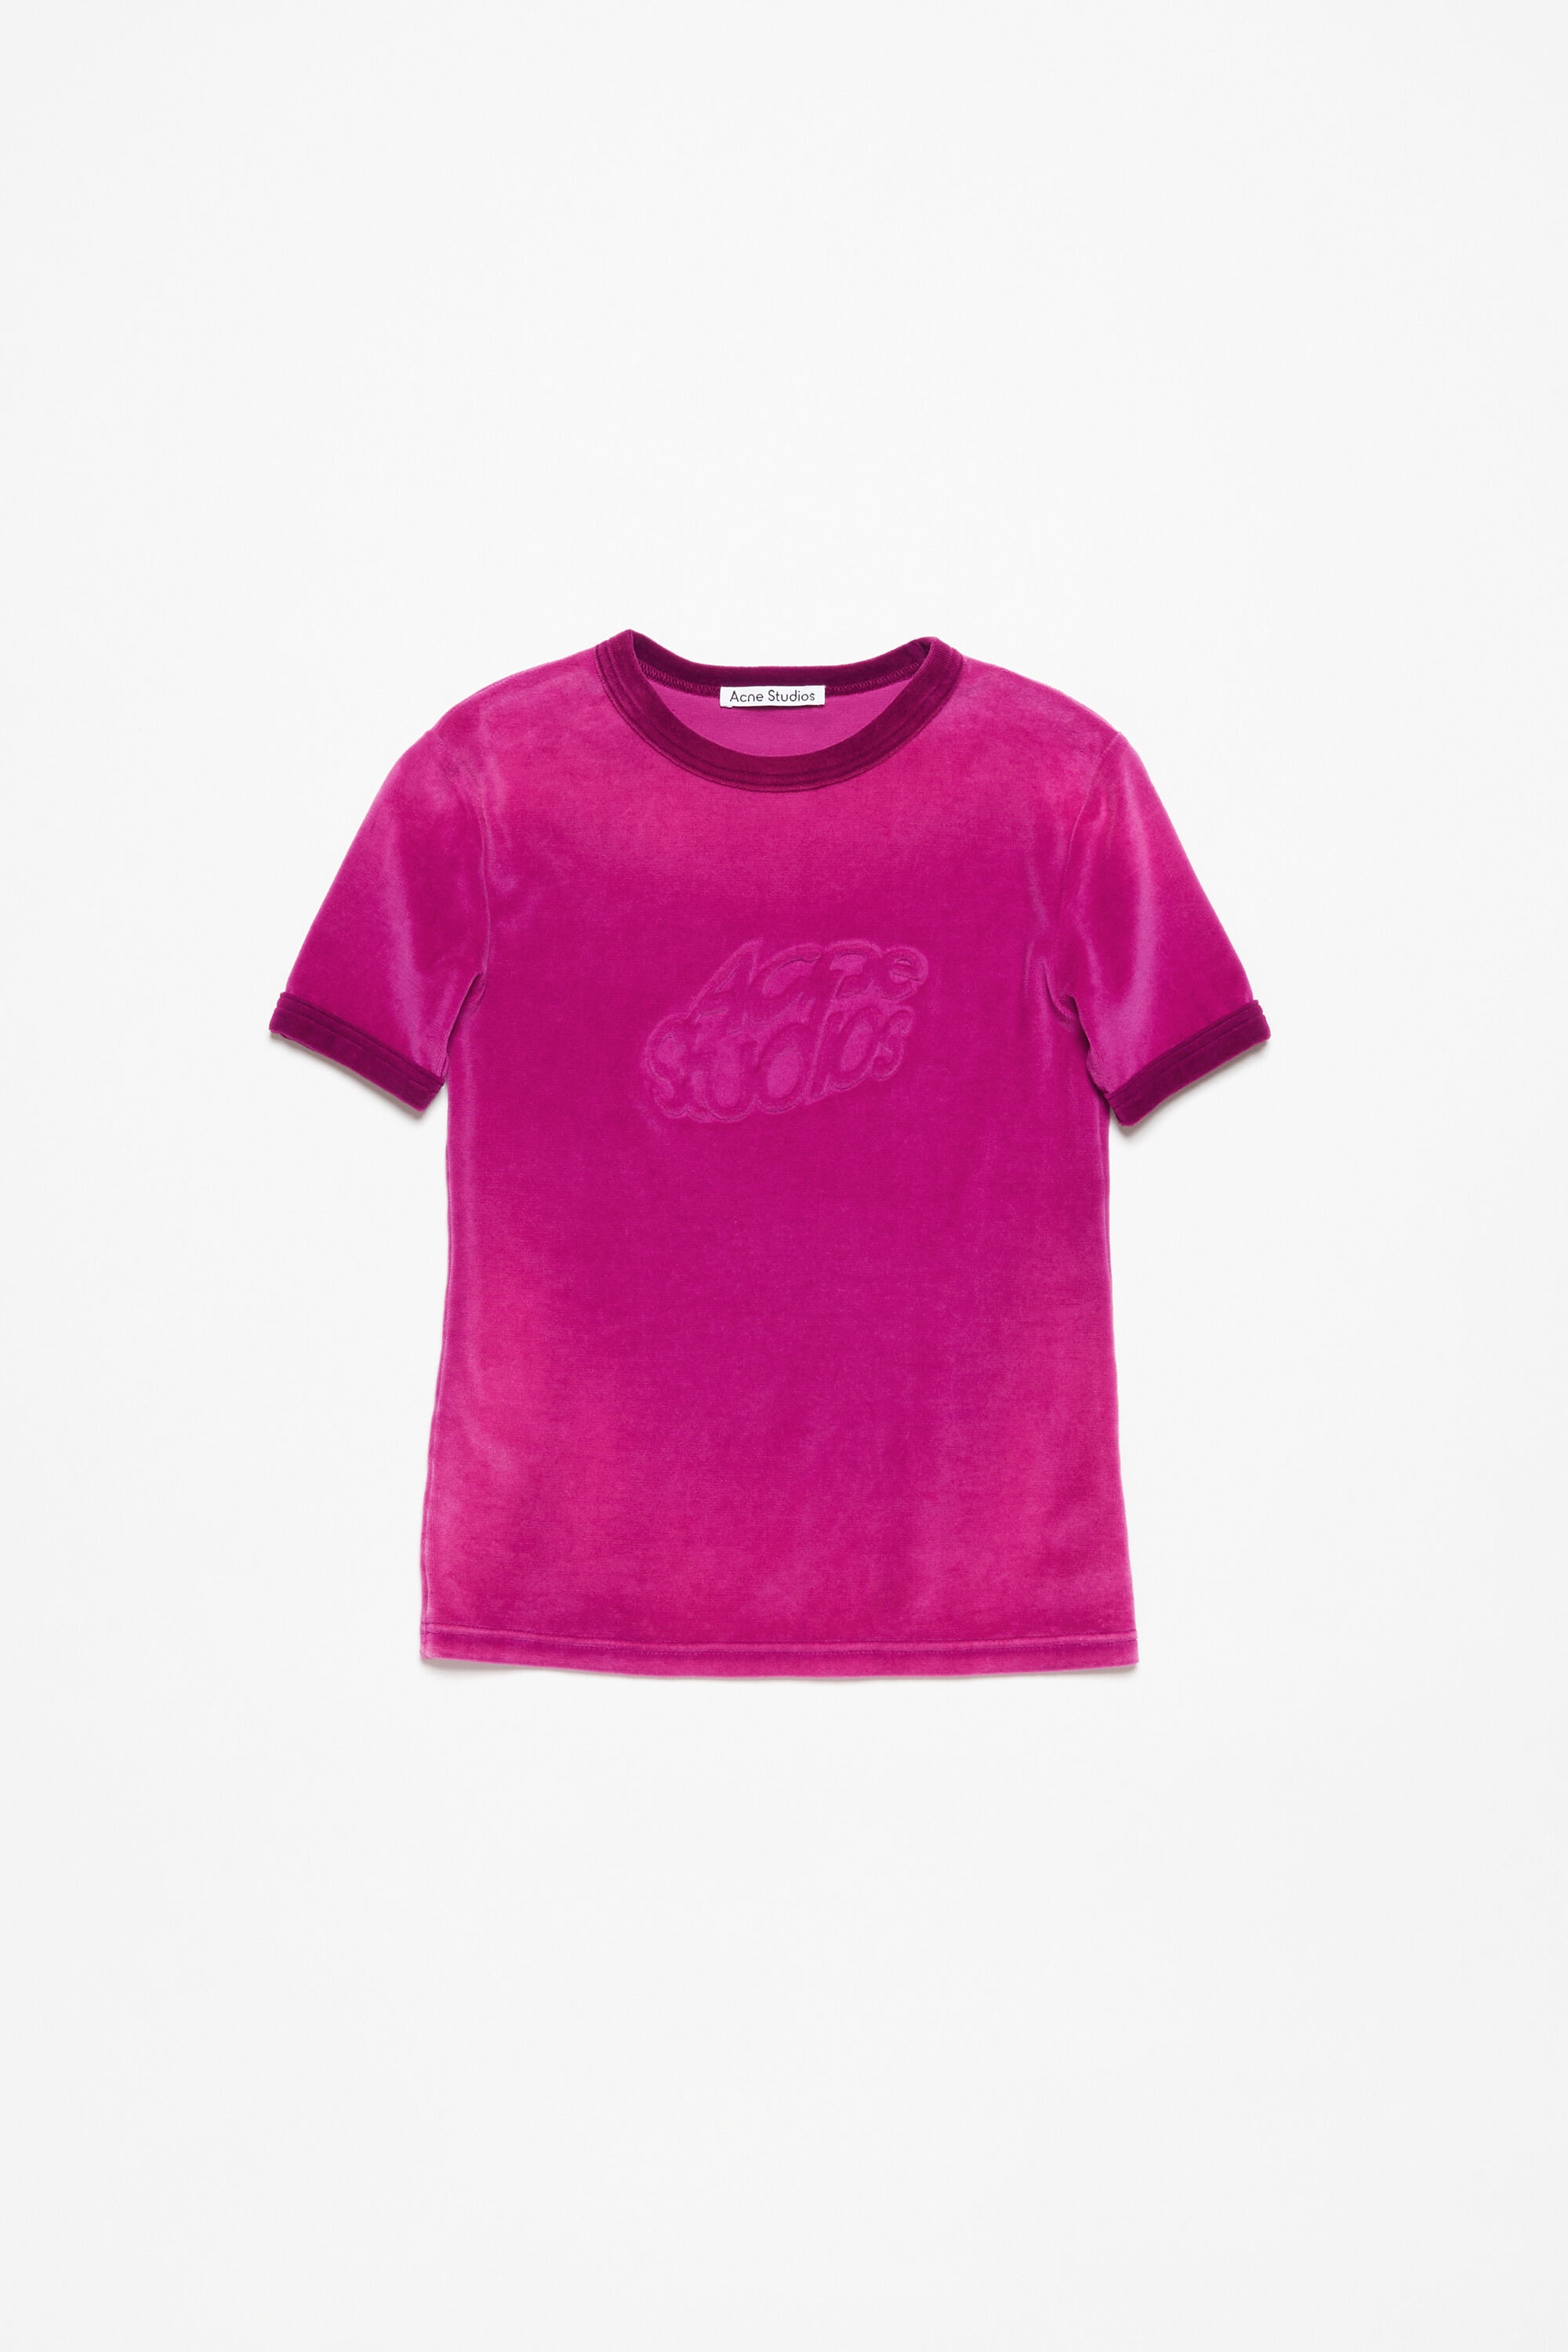 T-shirt logo - fitted fit - Magenta pink - 1